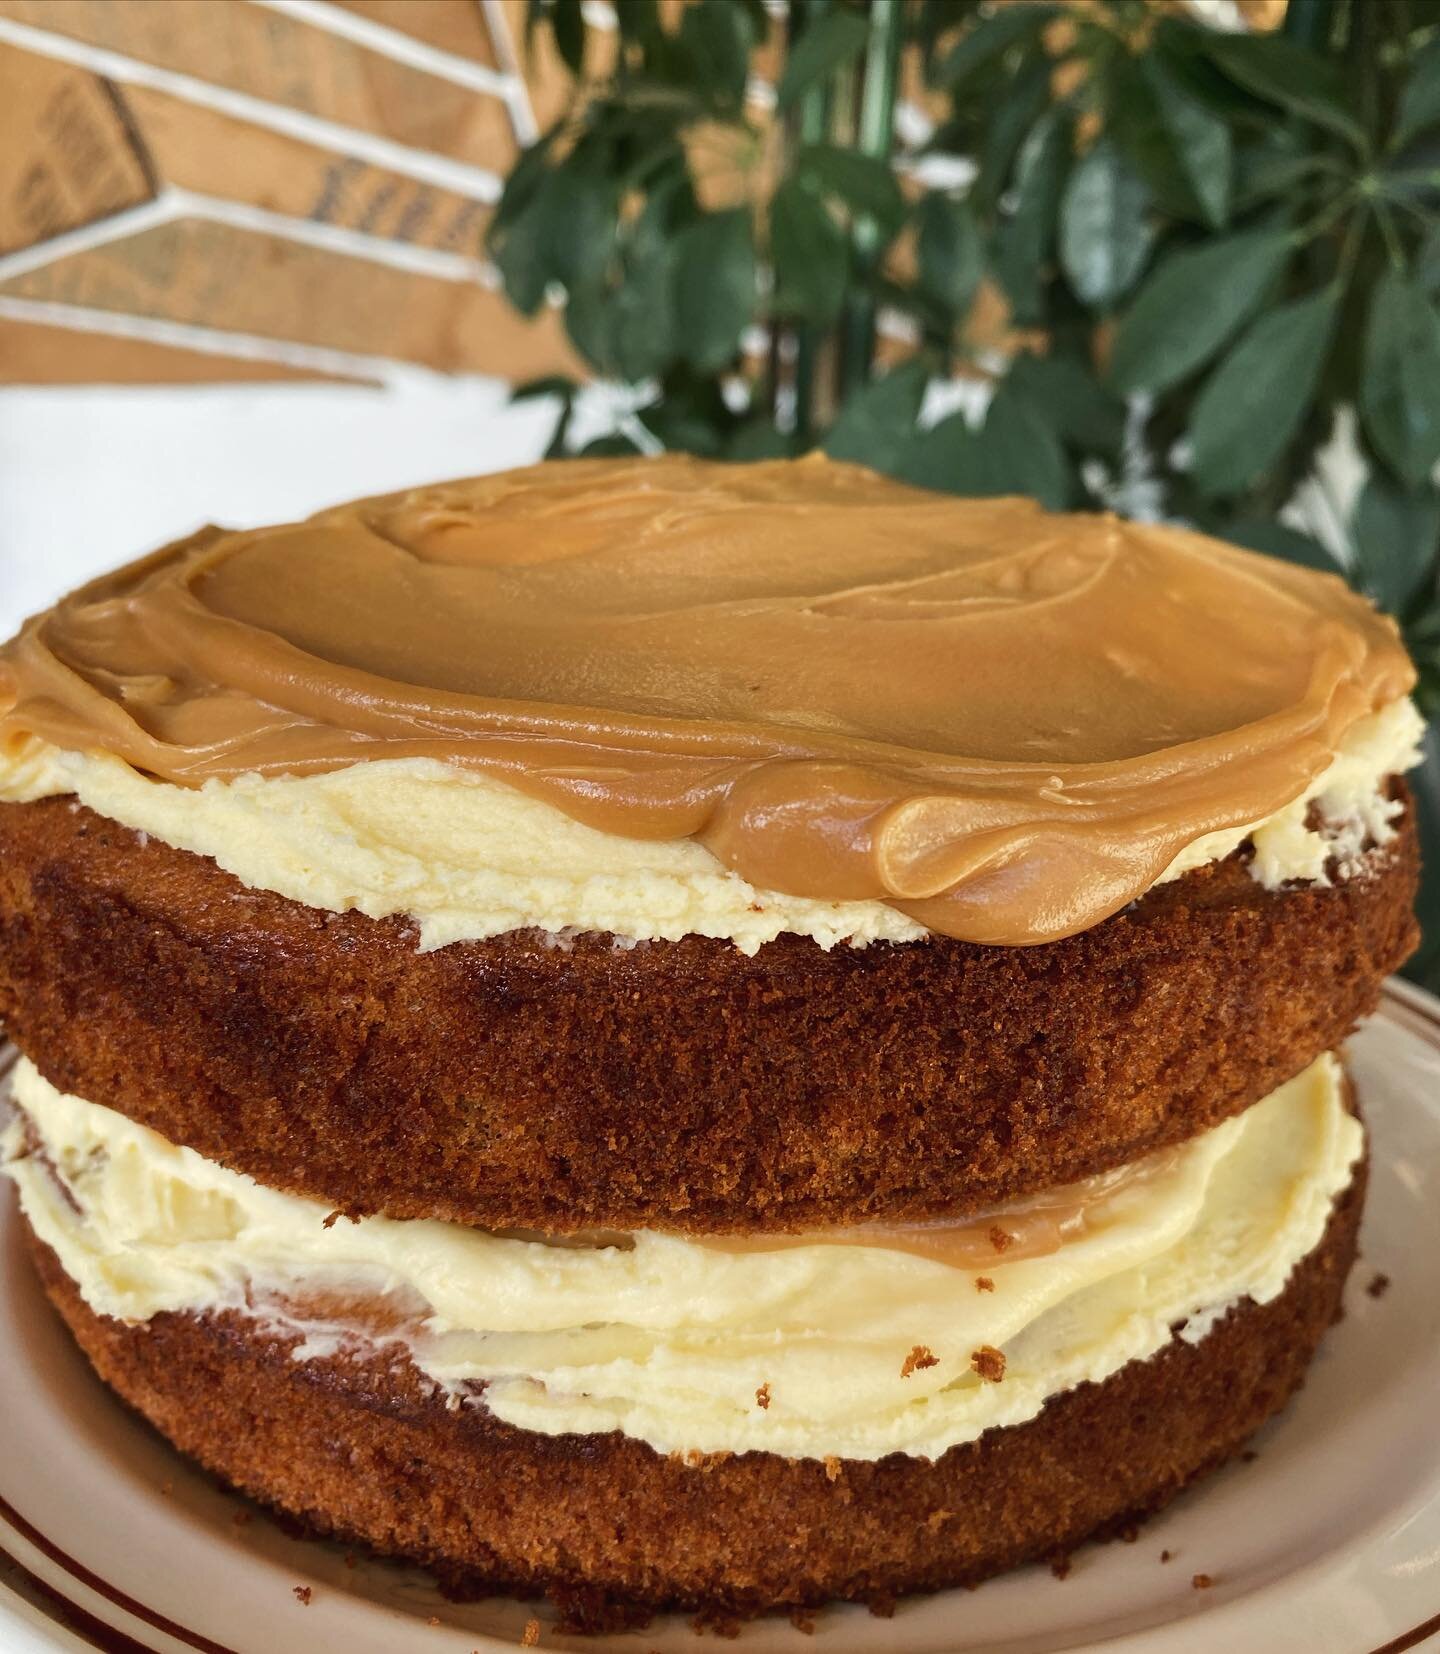 Cake of the Moment: Salted Caramel Spice Cake 
⠀

y&rsquo;all loved it so much so we whipped up another one. What flavour would you like to see next week? 🍰😋